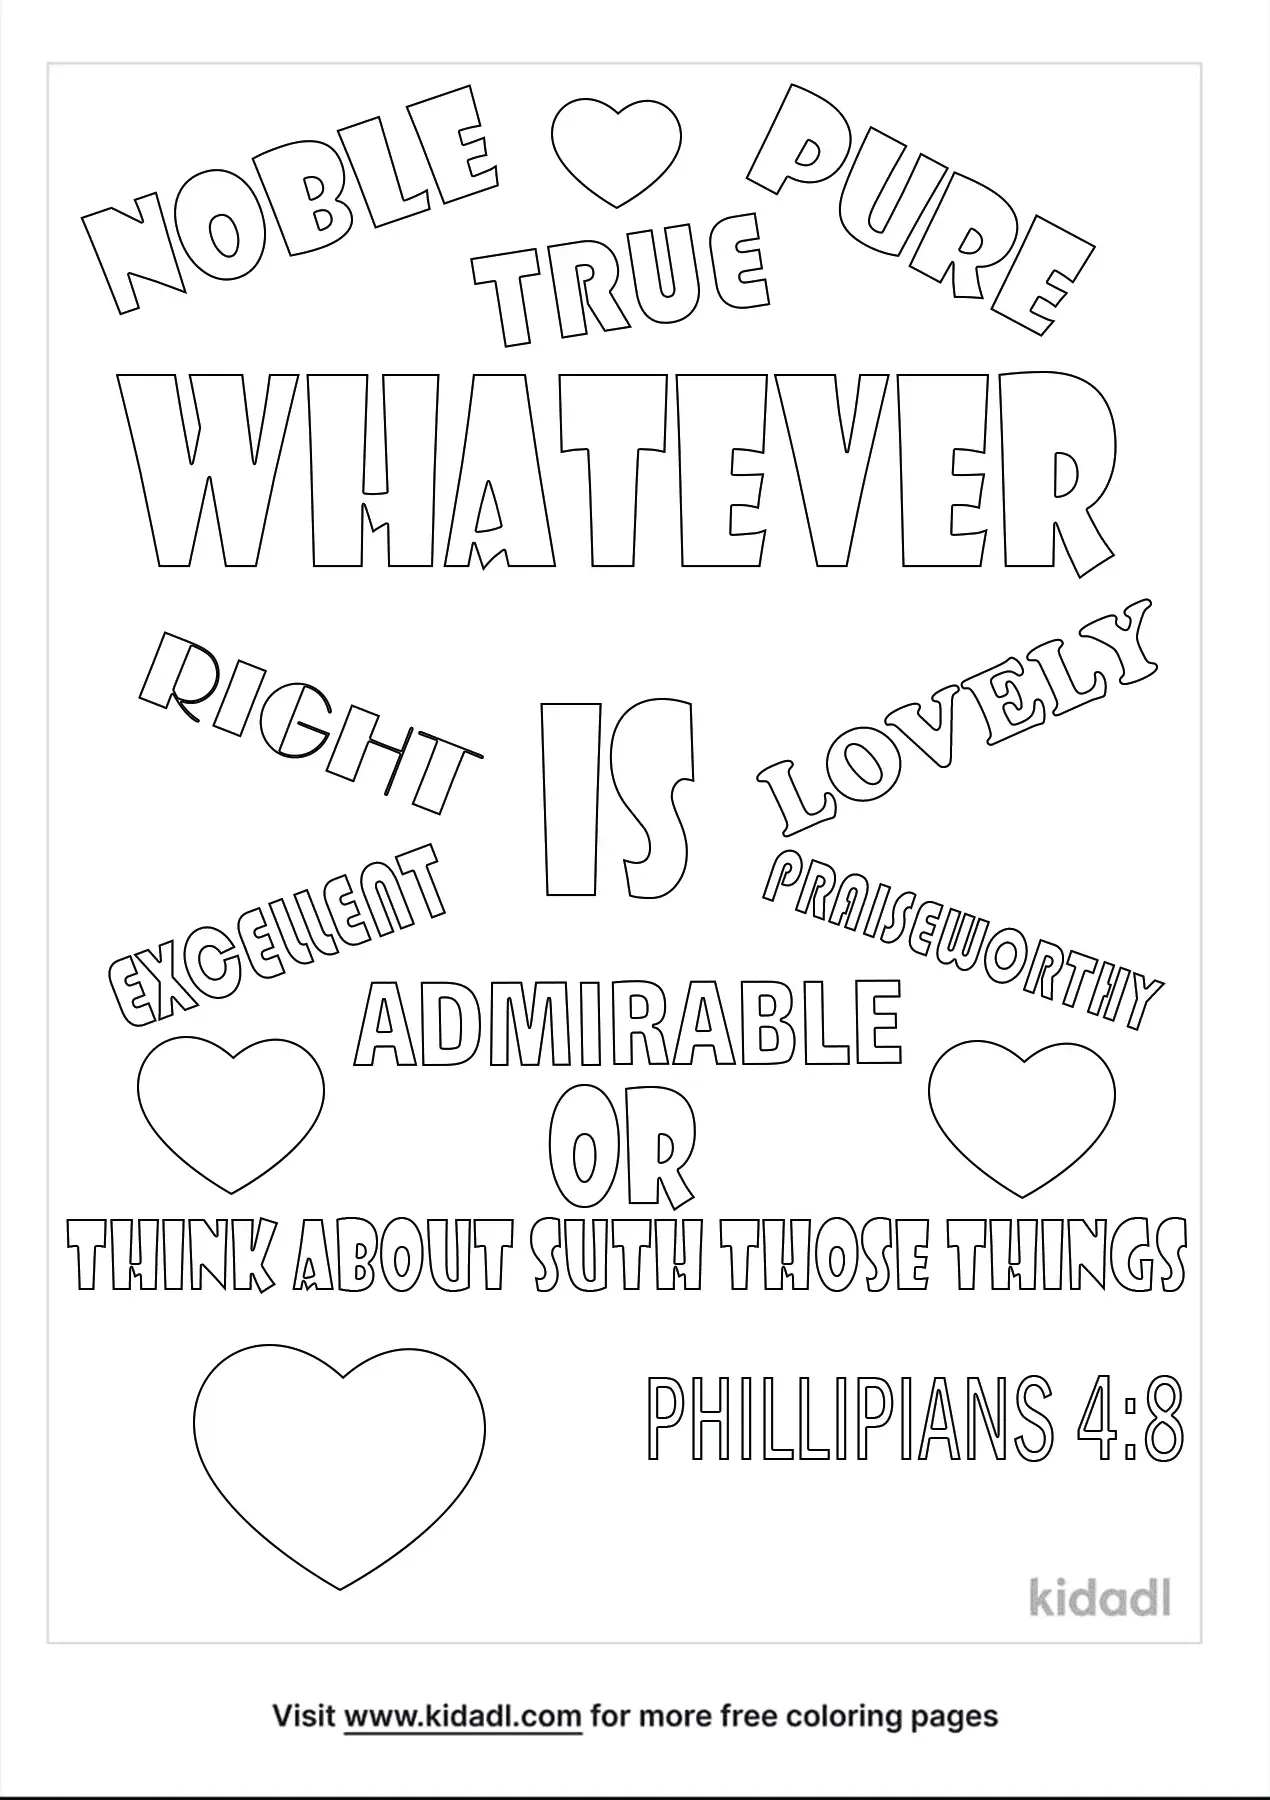 philippians-4-8-with-colorful-arrows-think-on-these-things-etsy-in-2020-bible-verse-coloring